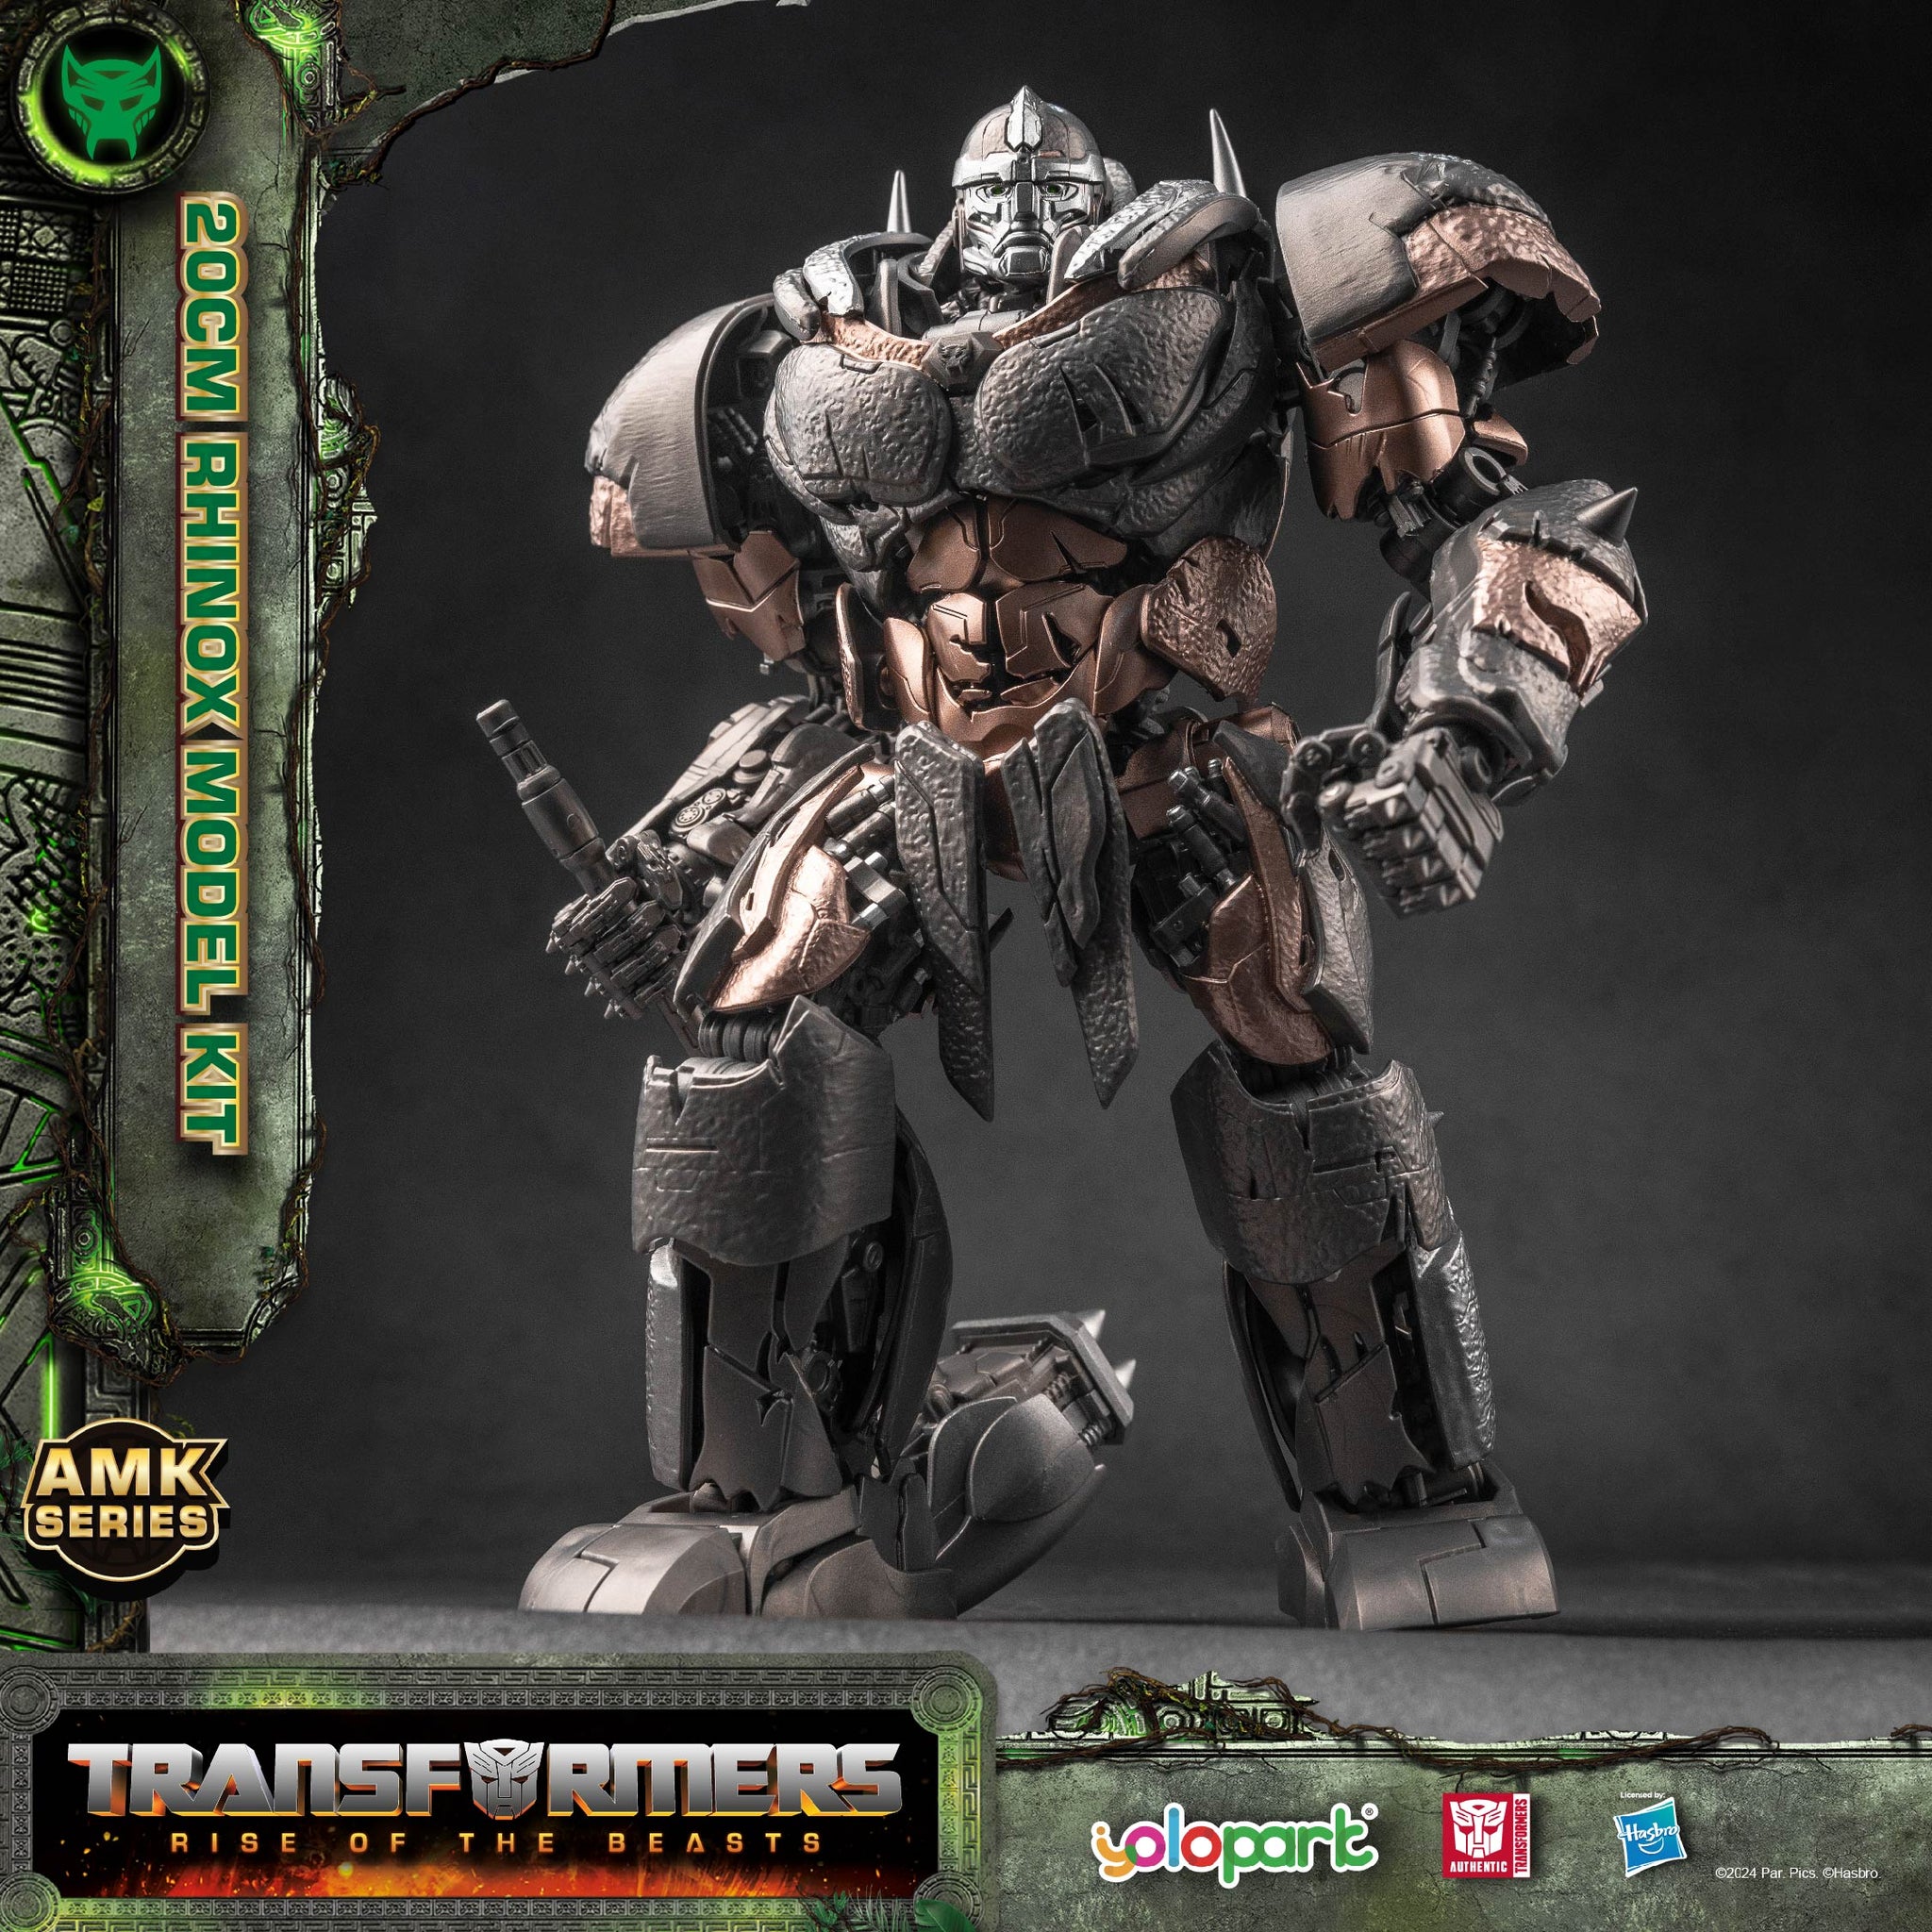 Yolopart Kits Rise of the Beasts Wave 2 - Scourge, Cheetor, and Rhinox -  Transformers